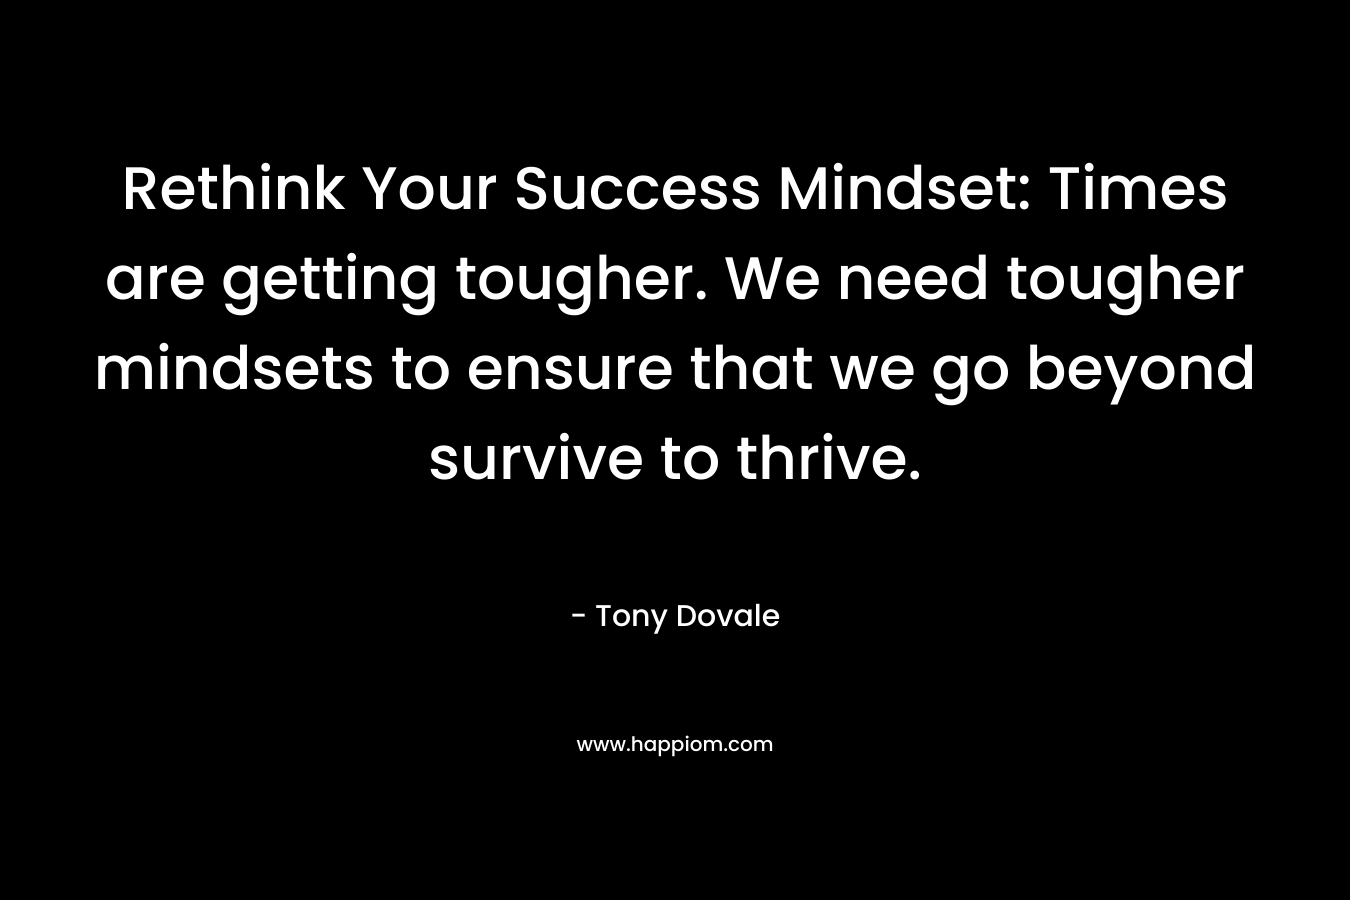 Rethink Your Success Mindset: Times are getting tougher. We need tougher mindsets to ensure that we go beyond survive to thrive. – Tony Dovale